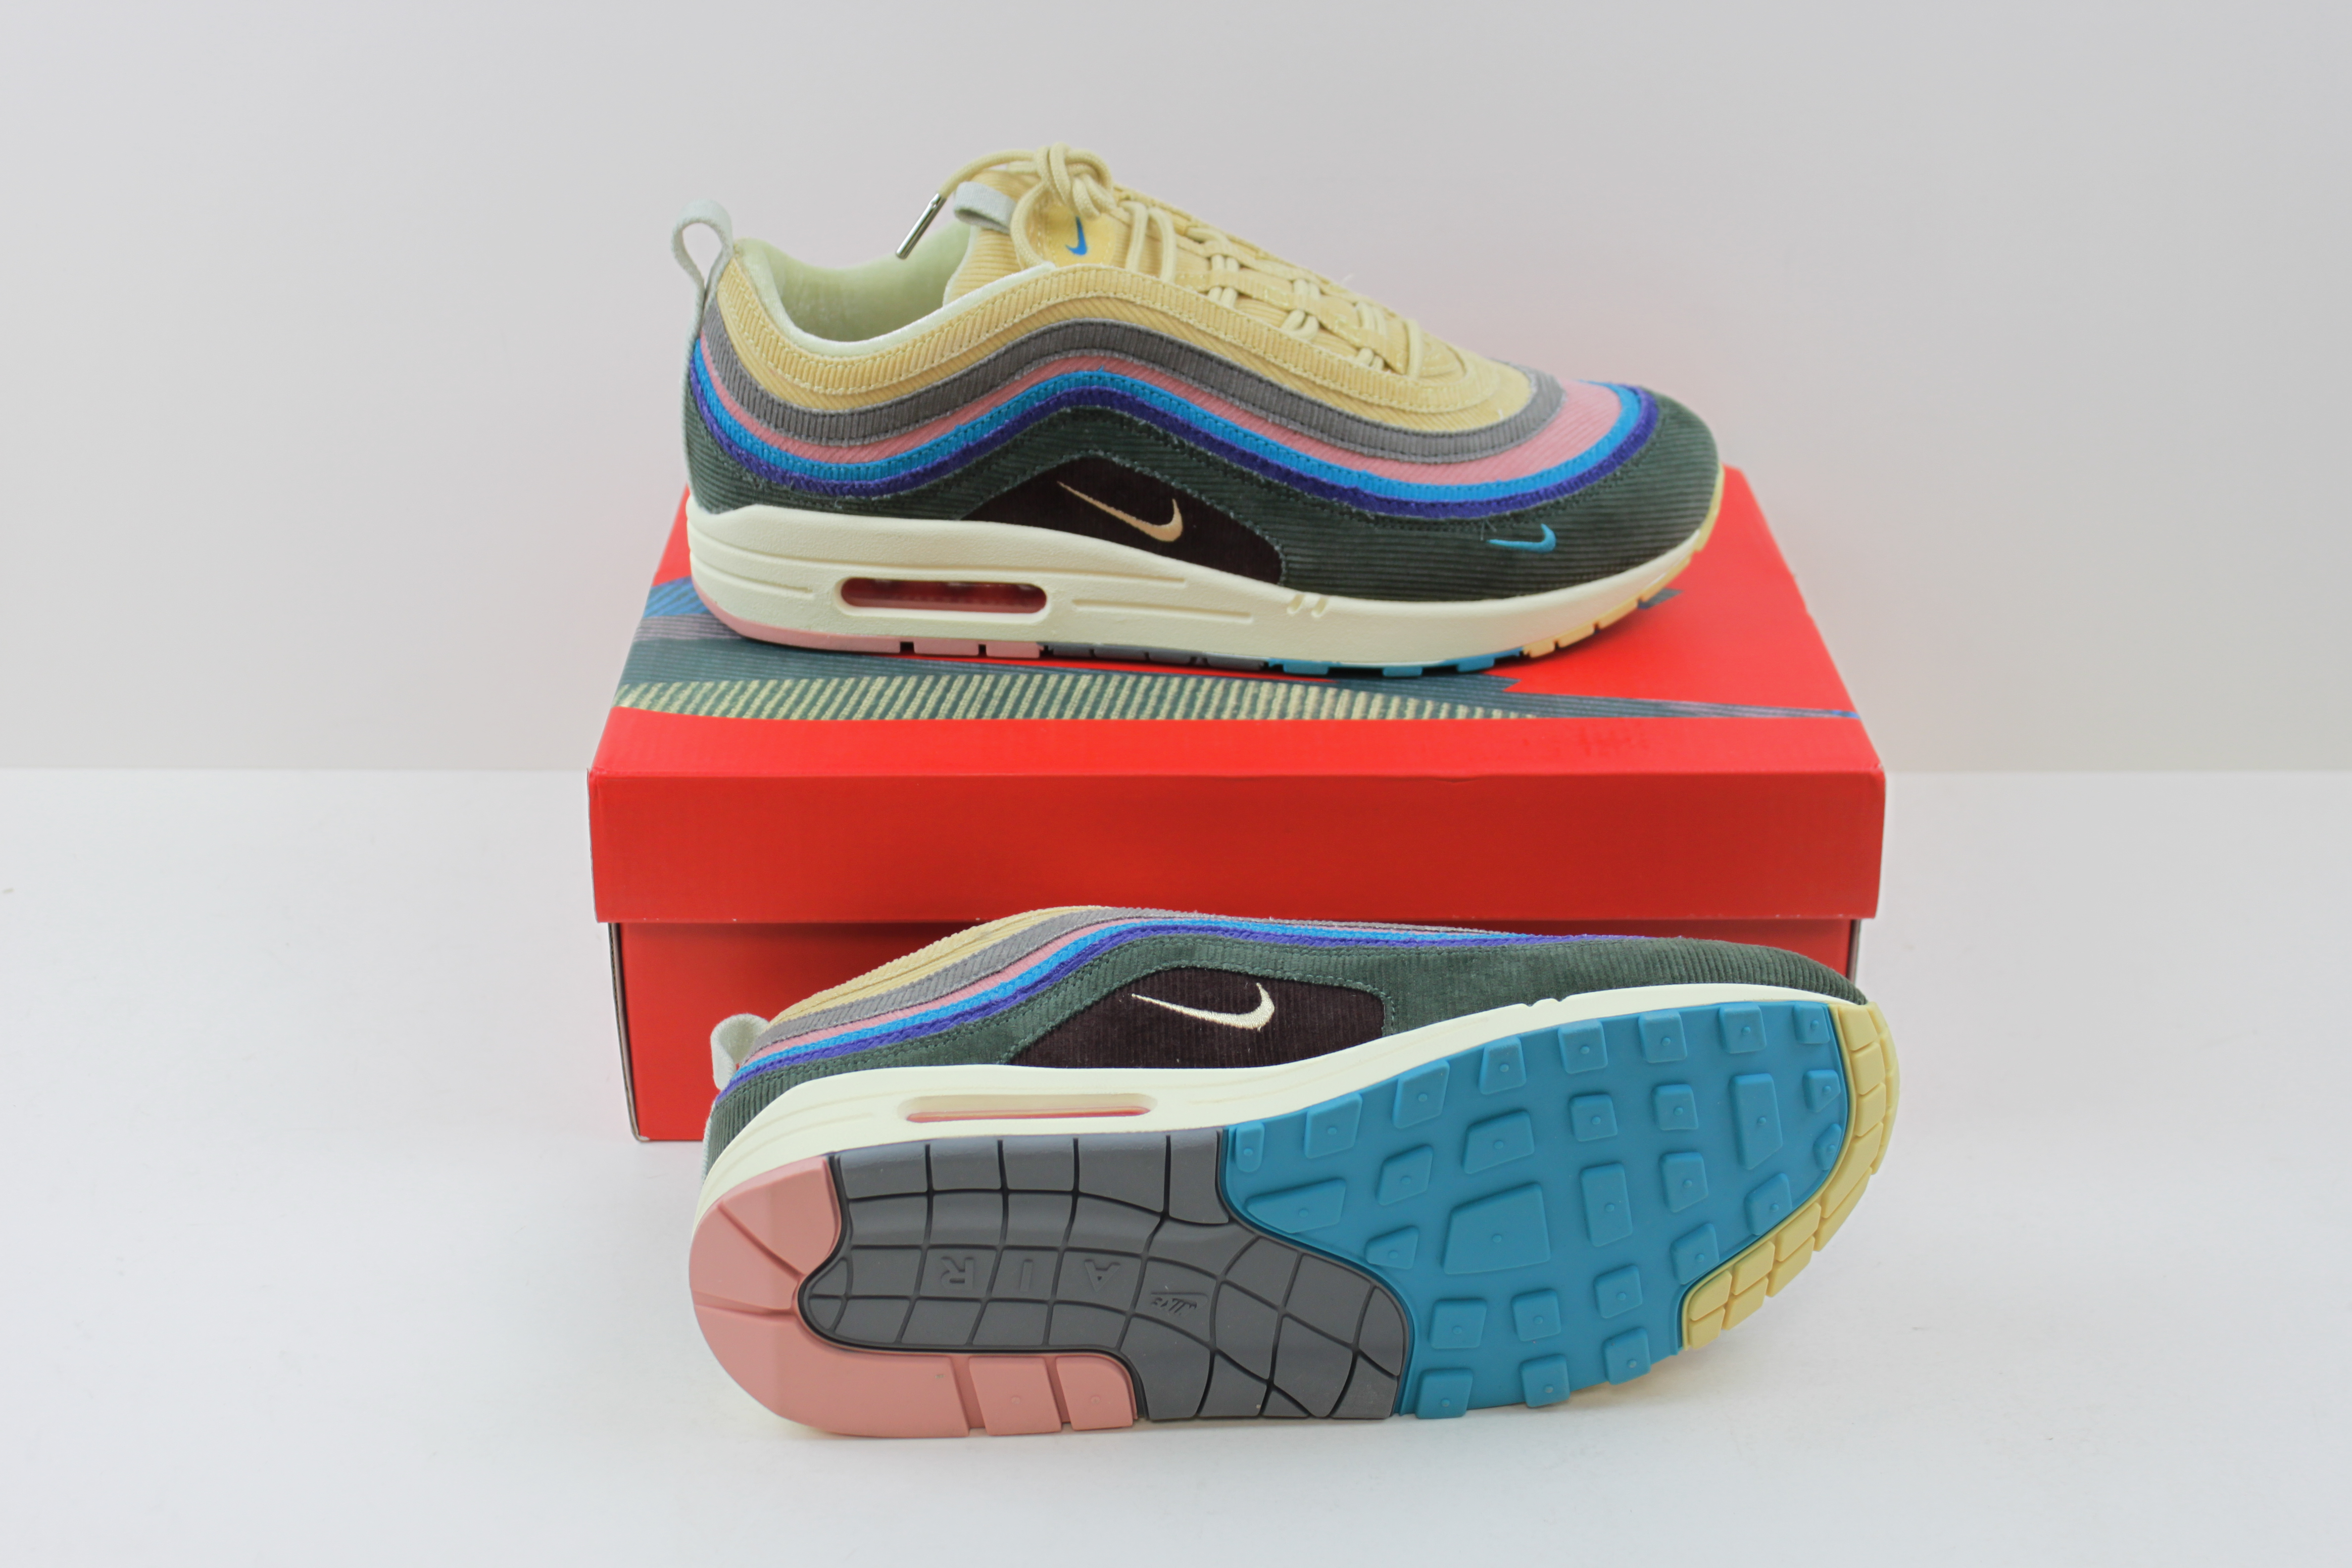 Nike Men's Air Max 1/97 Trainers, 'Sean Wotherspoon', UK 9.5. AJ4219400 - Image 2 of 3